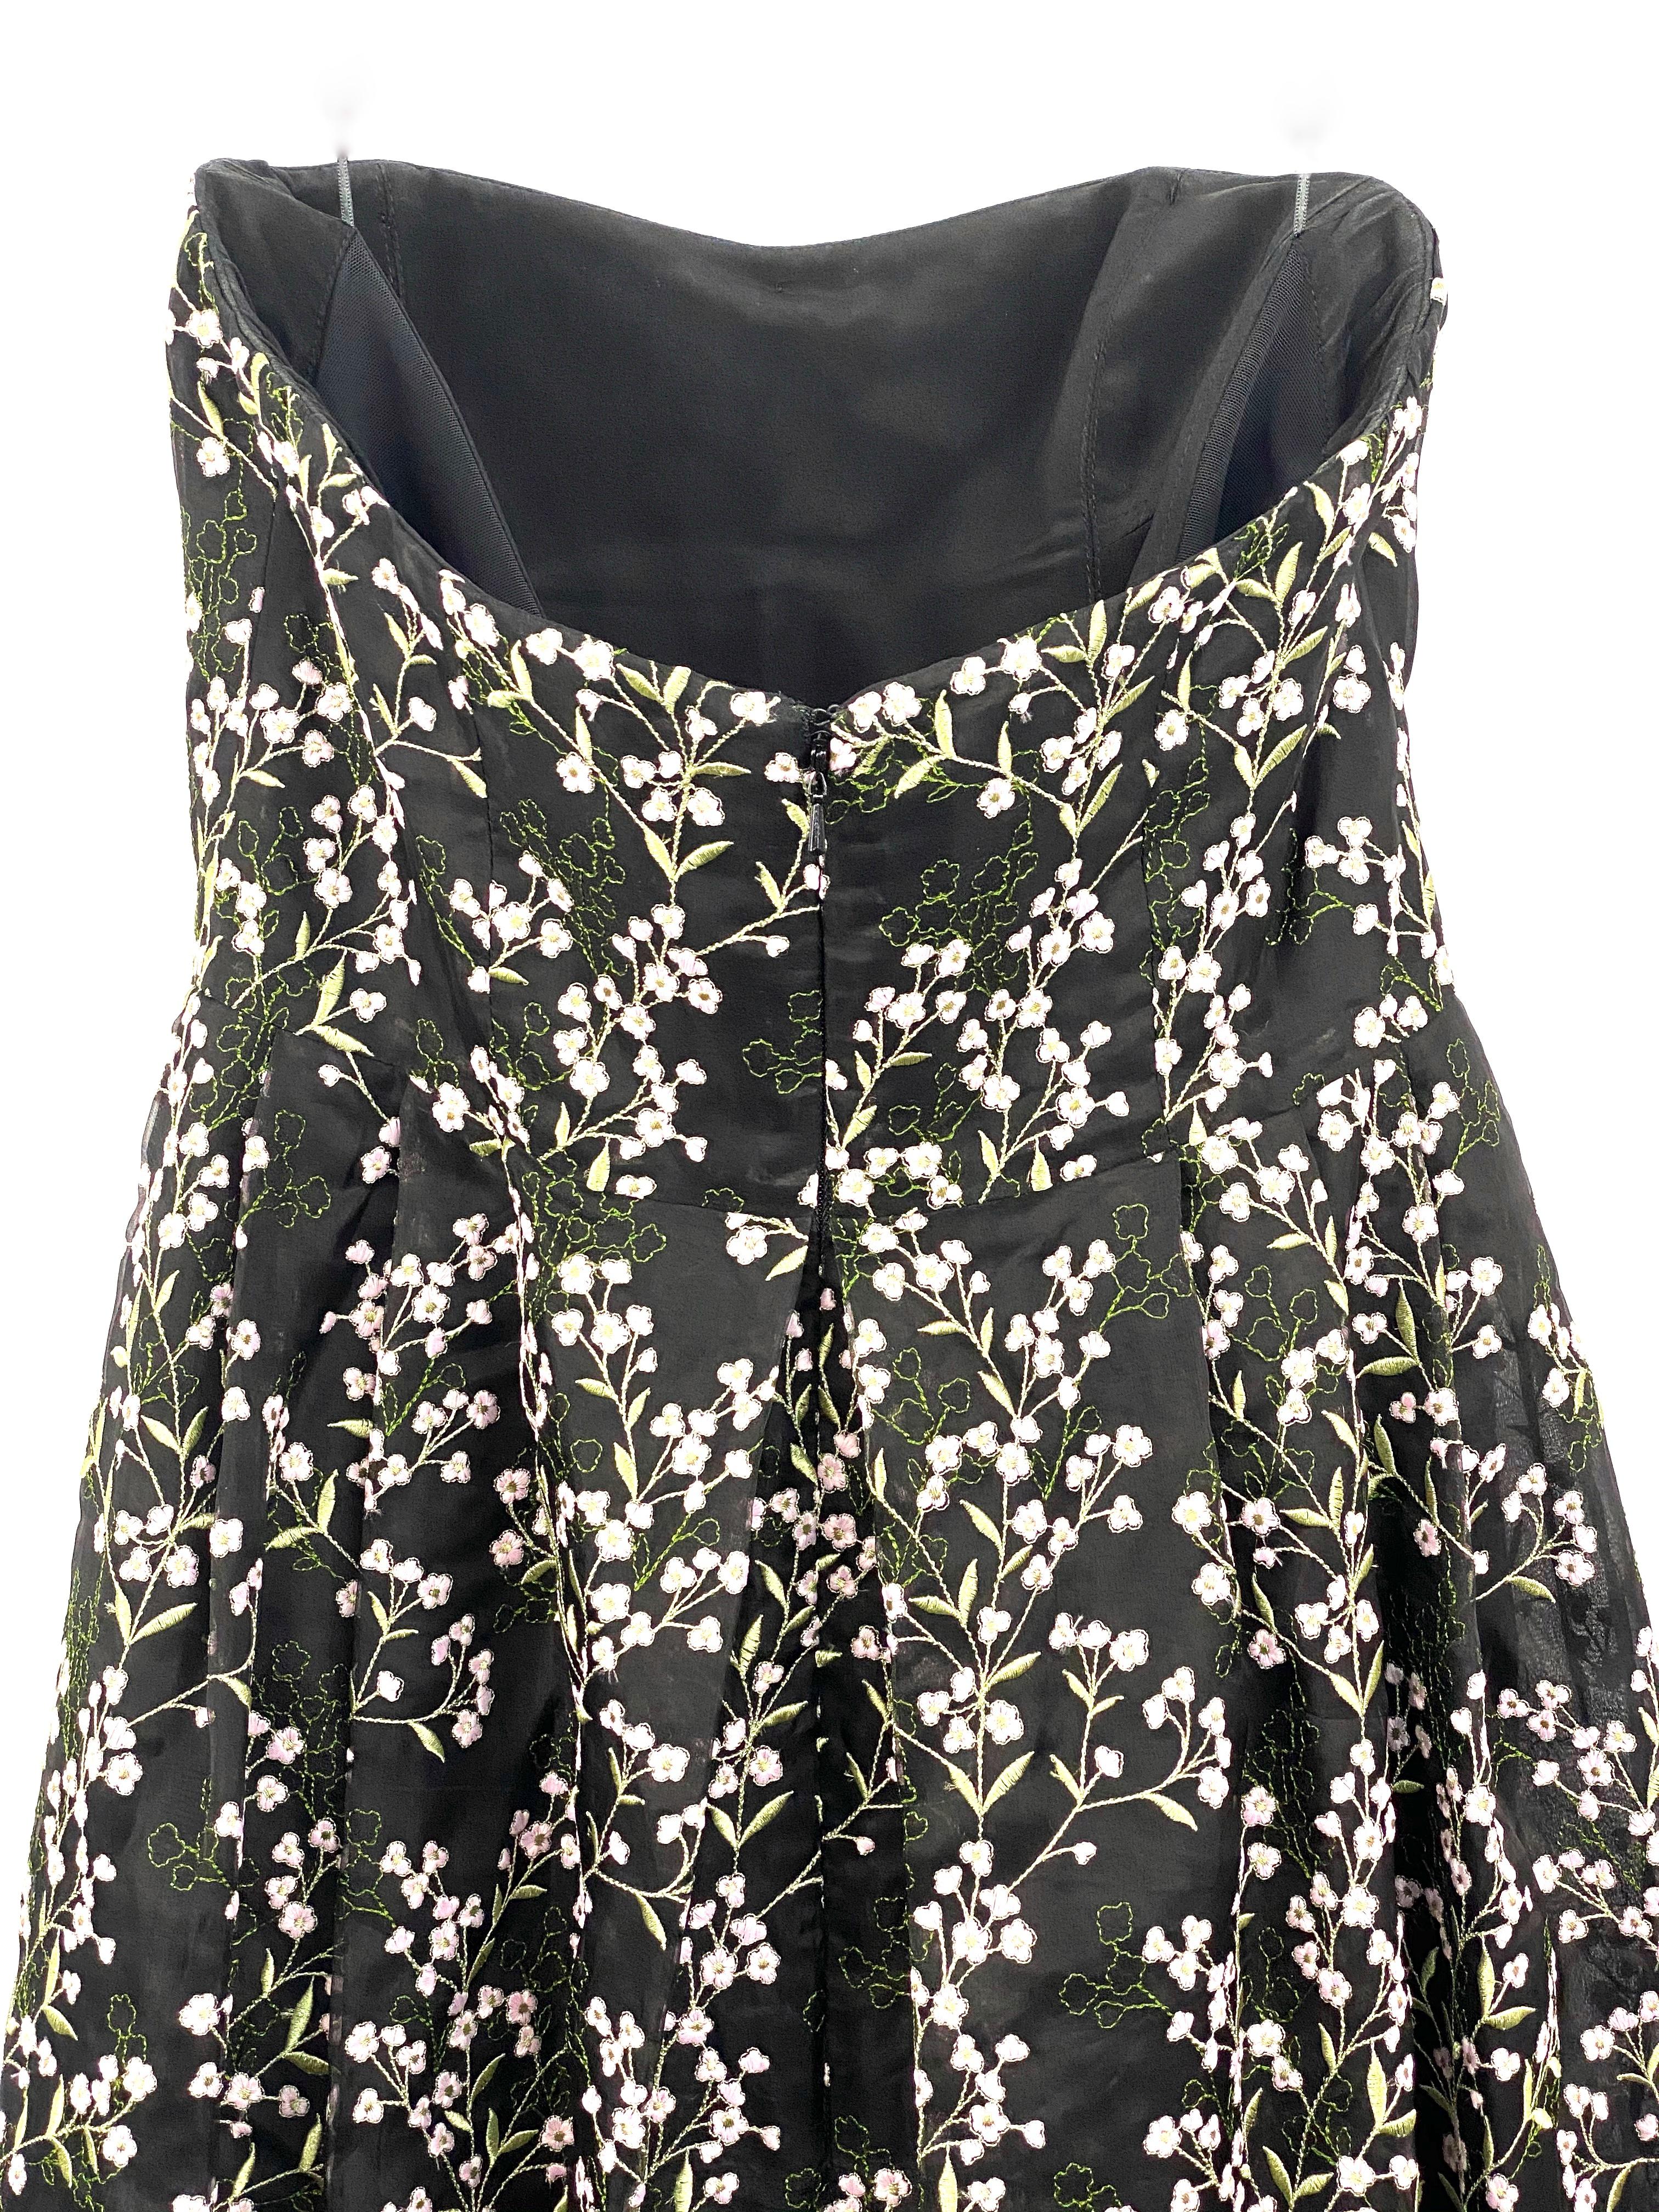 Erdem Black Silk and Floral Pattern Evening Dress Size 8 In Excellent Condition For Sale In Beverly Hills, CA